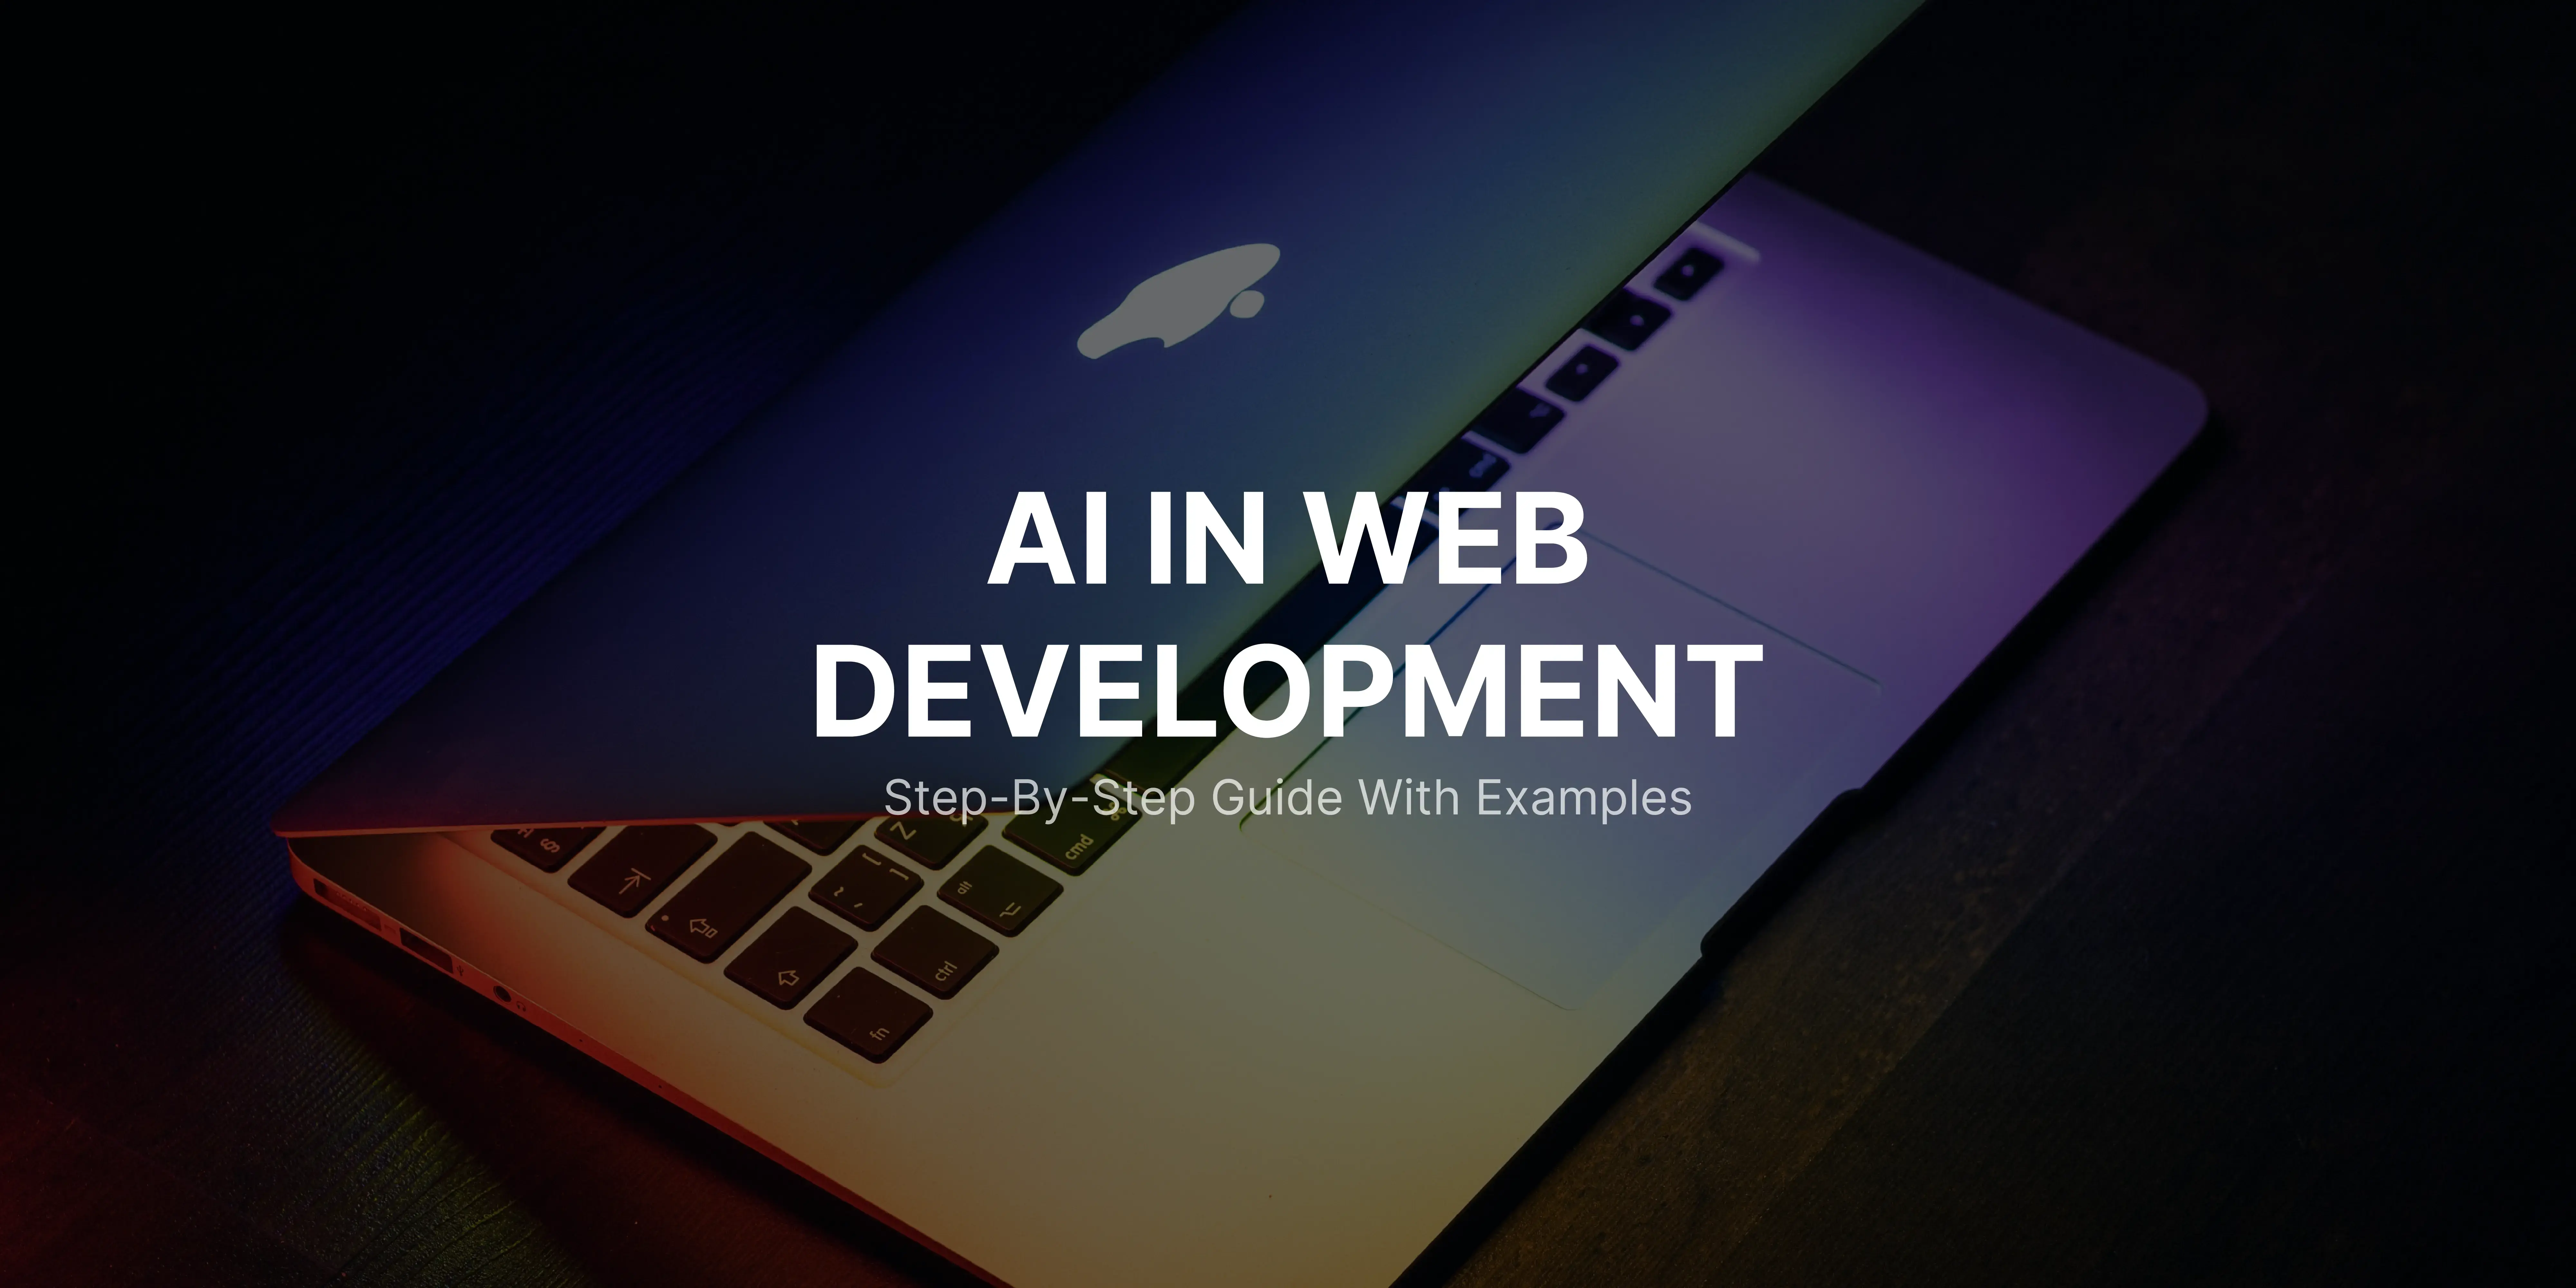 Incorporating AI into Web Development: How to Get Started